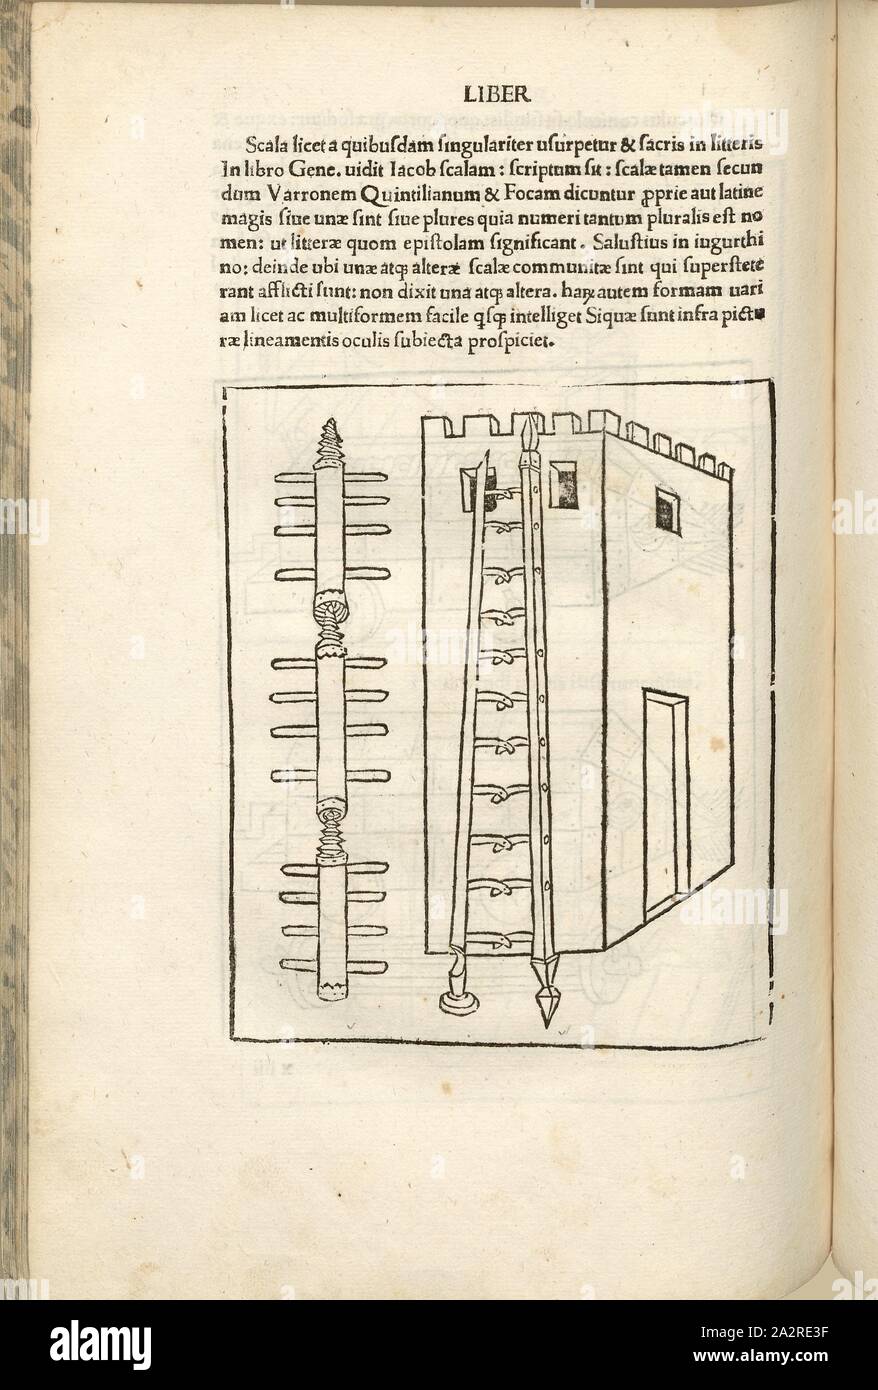 Foldable ladders, Warfare in the Middle Ages, Overcoming a Fortress Wall, Escalade, Comparison of a Collapsible and Foldable Ladder, Woodcut, S. 348, (Liber decimus), 1483, Roberto Valturio: [De re militari]. Verona: [Boninus de Boninis], [1483 Stock Photo